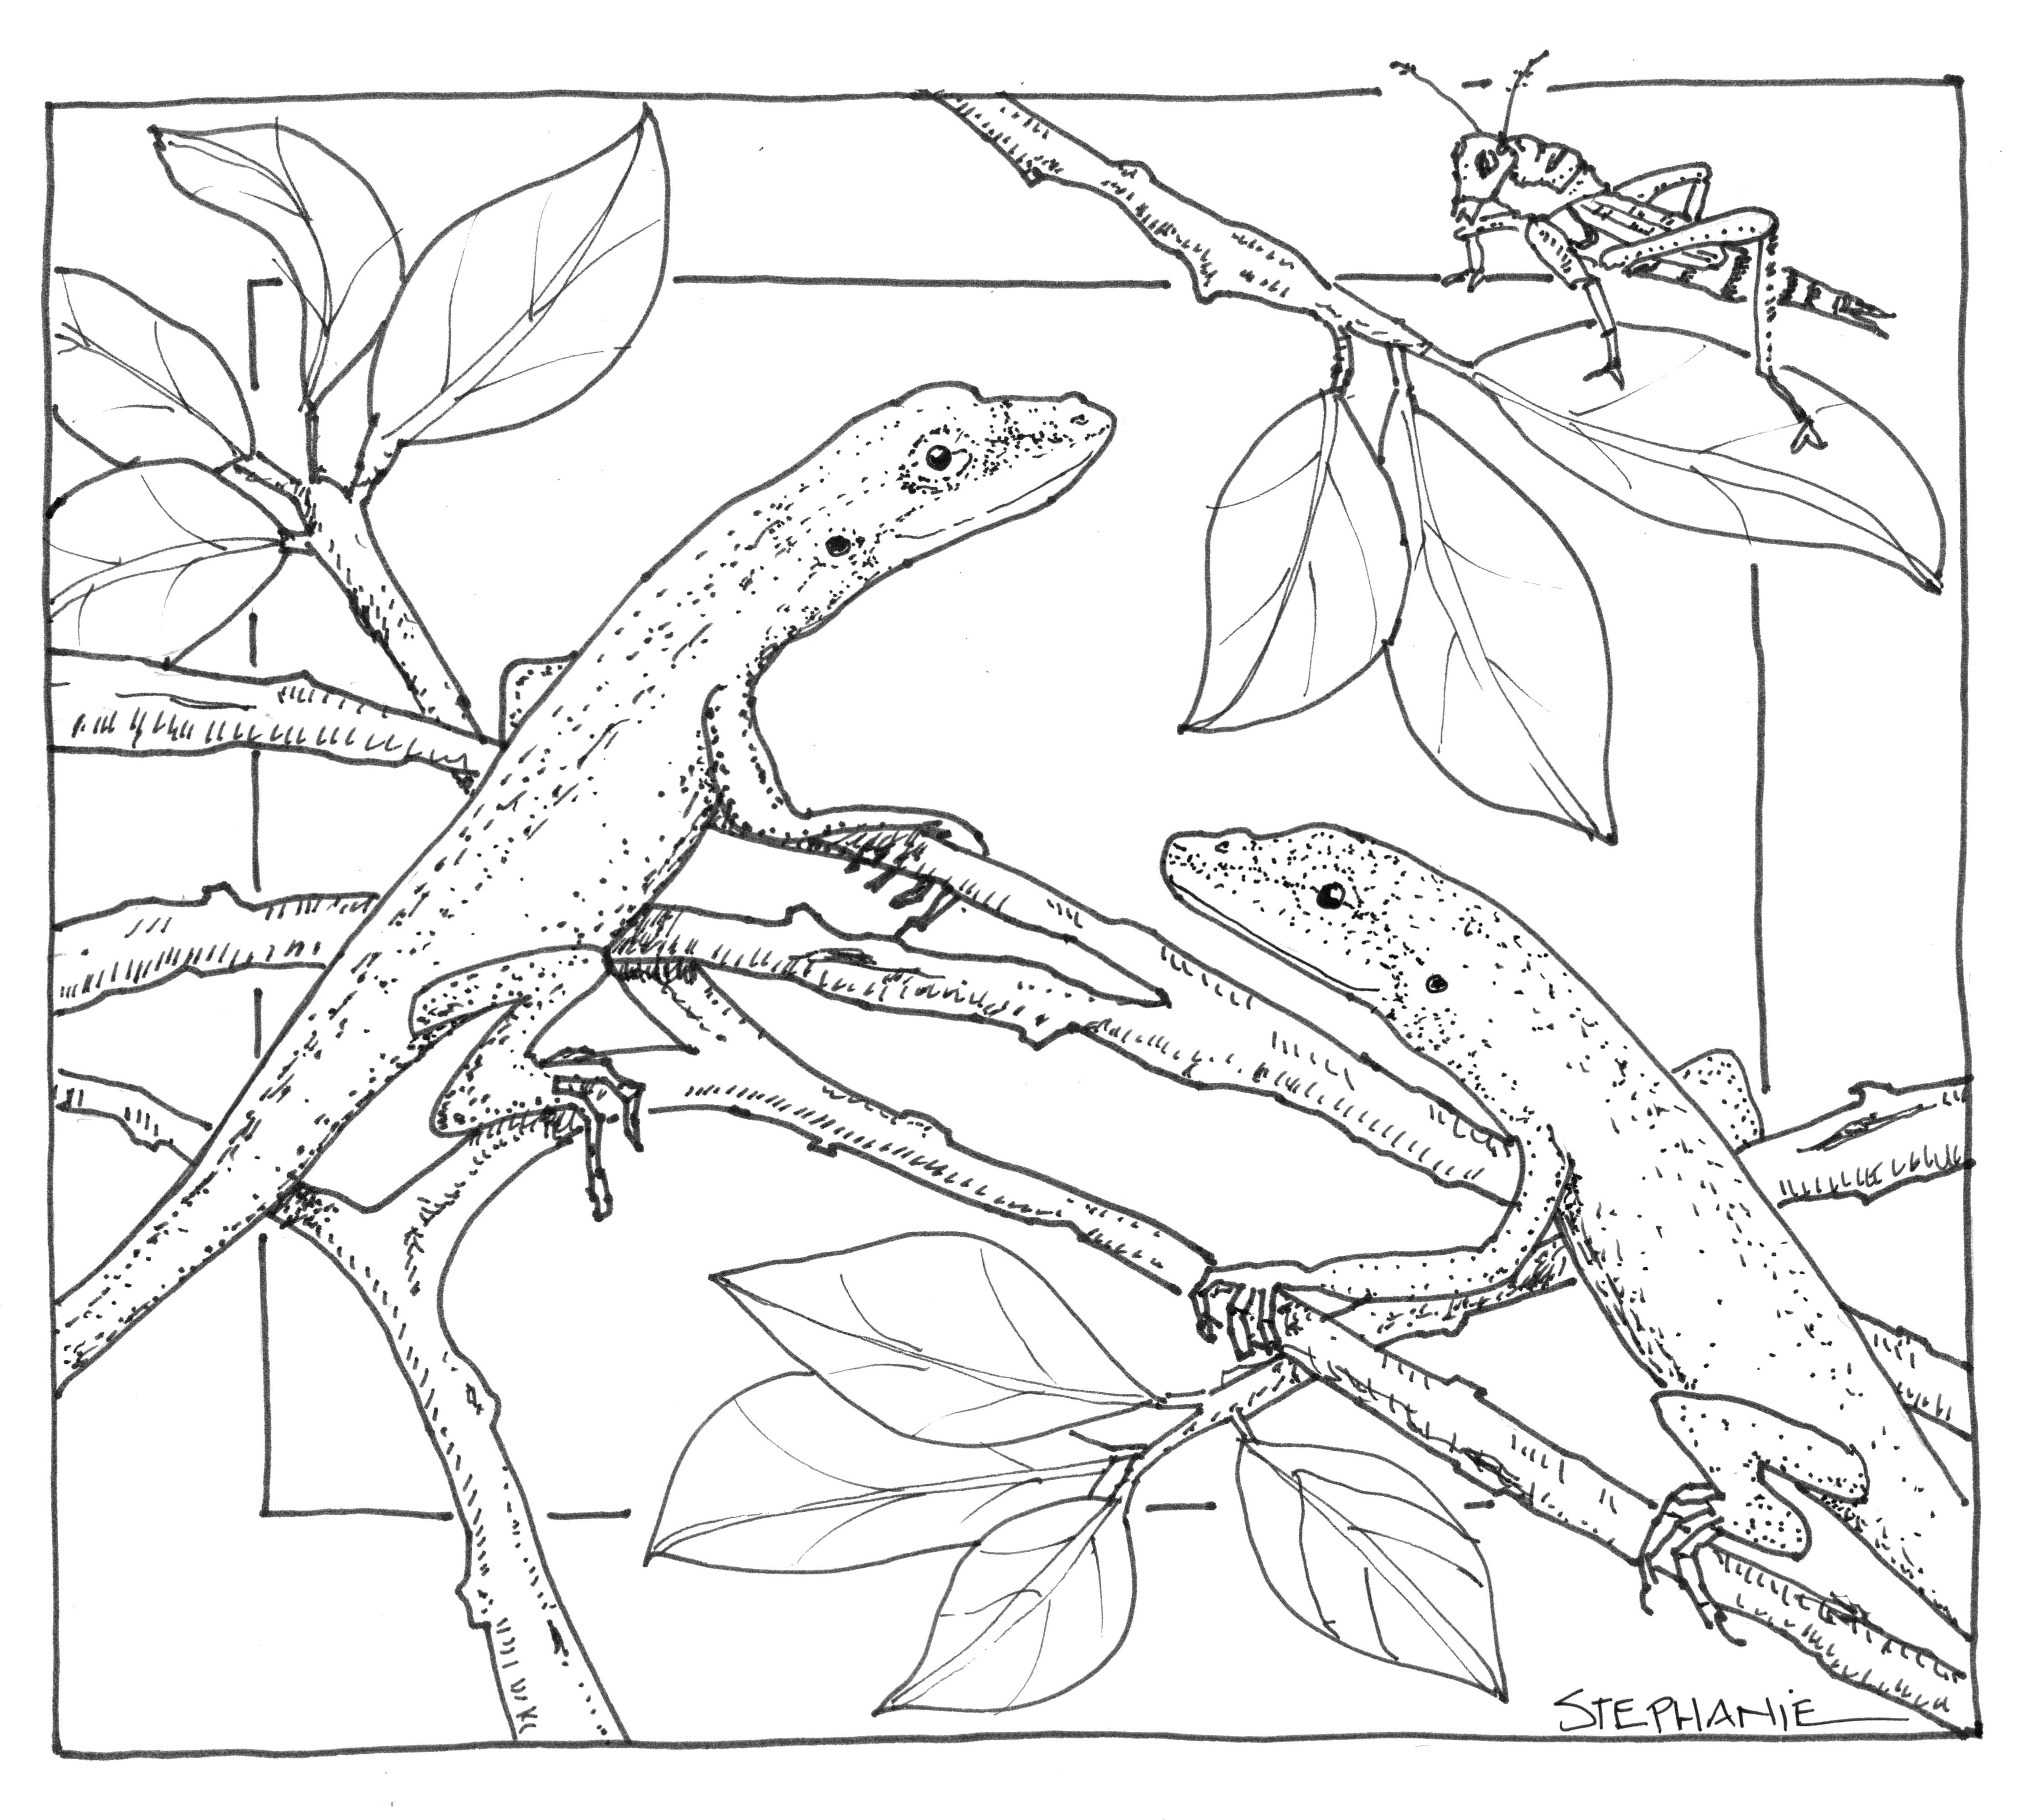 Coloring Lizard sitting on leaves. Category Animals. Tags:  Animals, lizard, grasshopper, leaves.